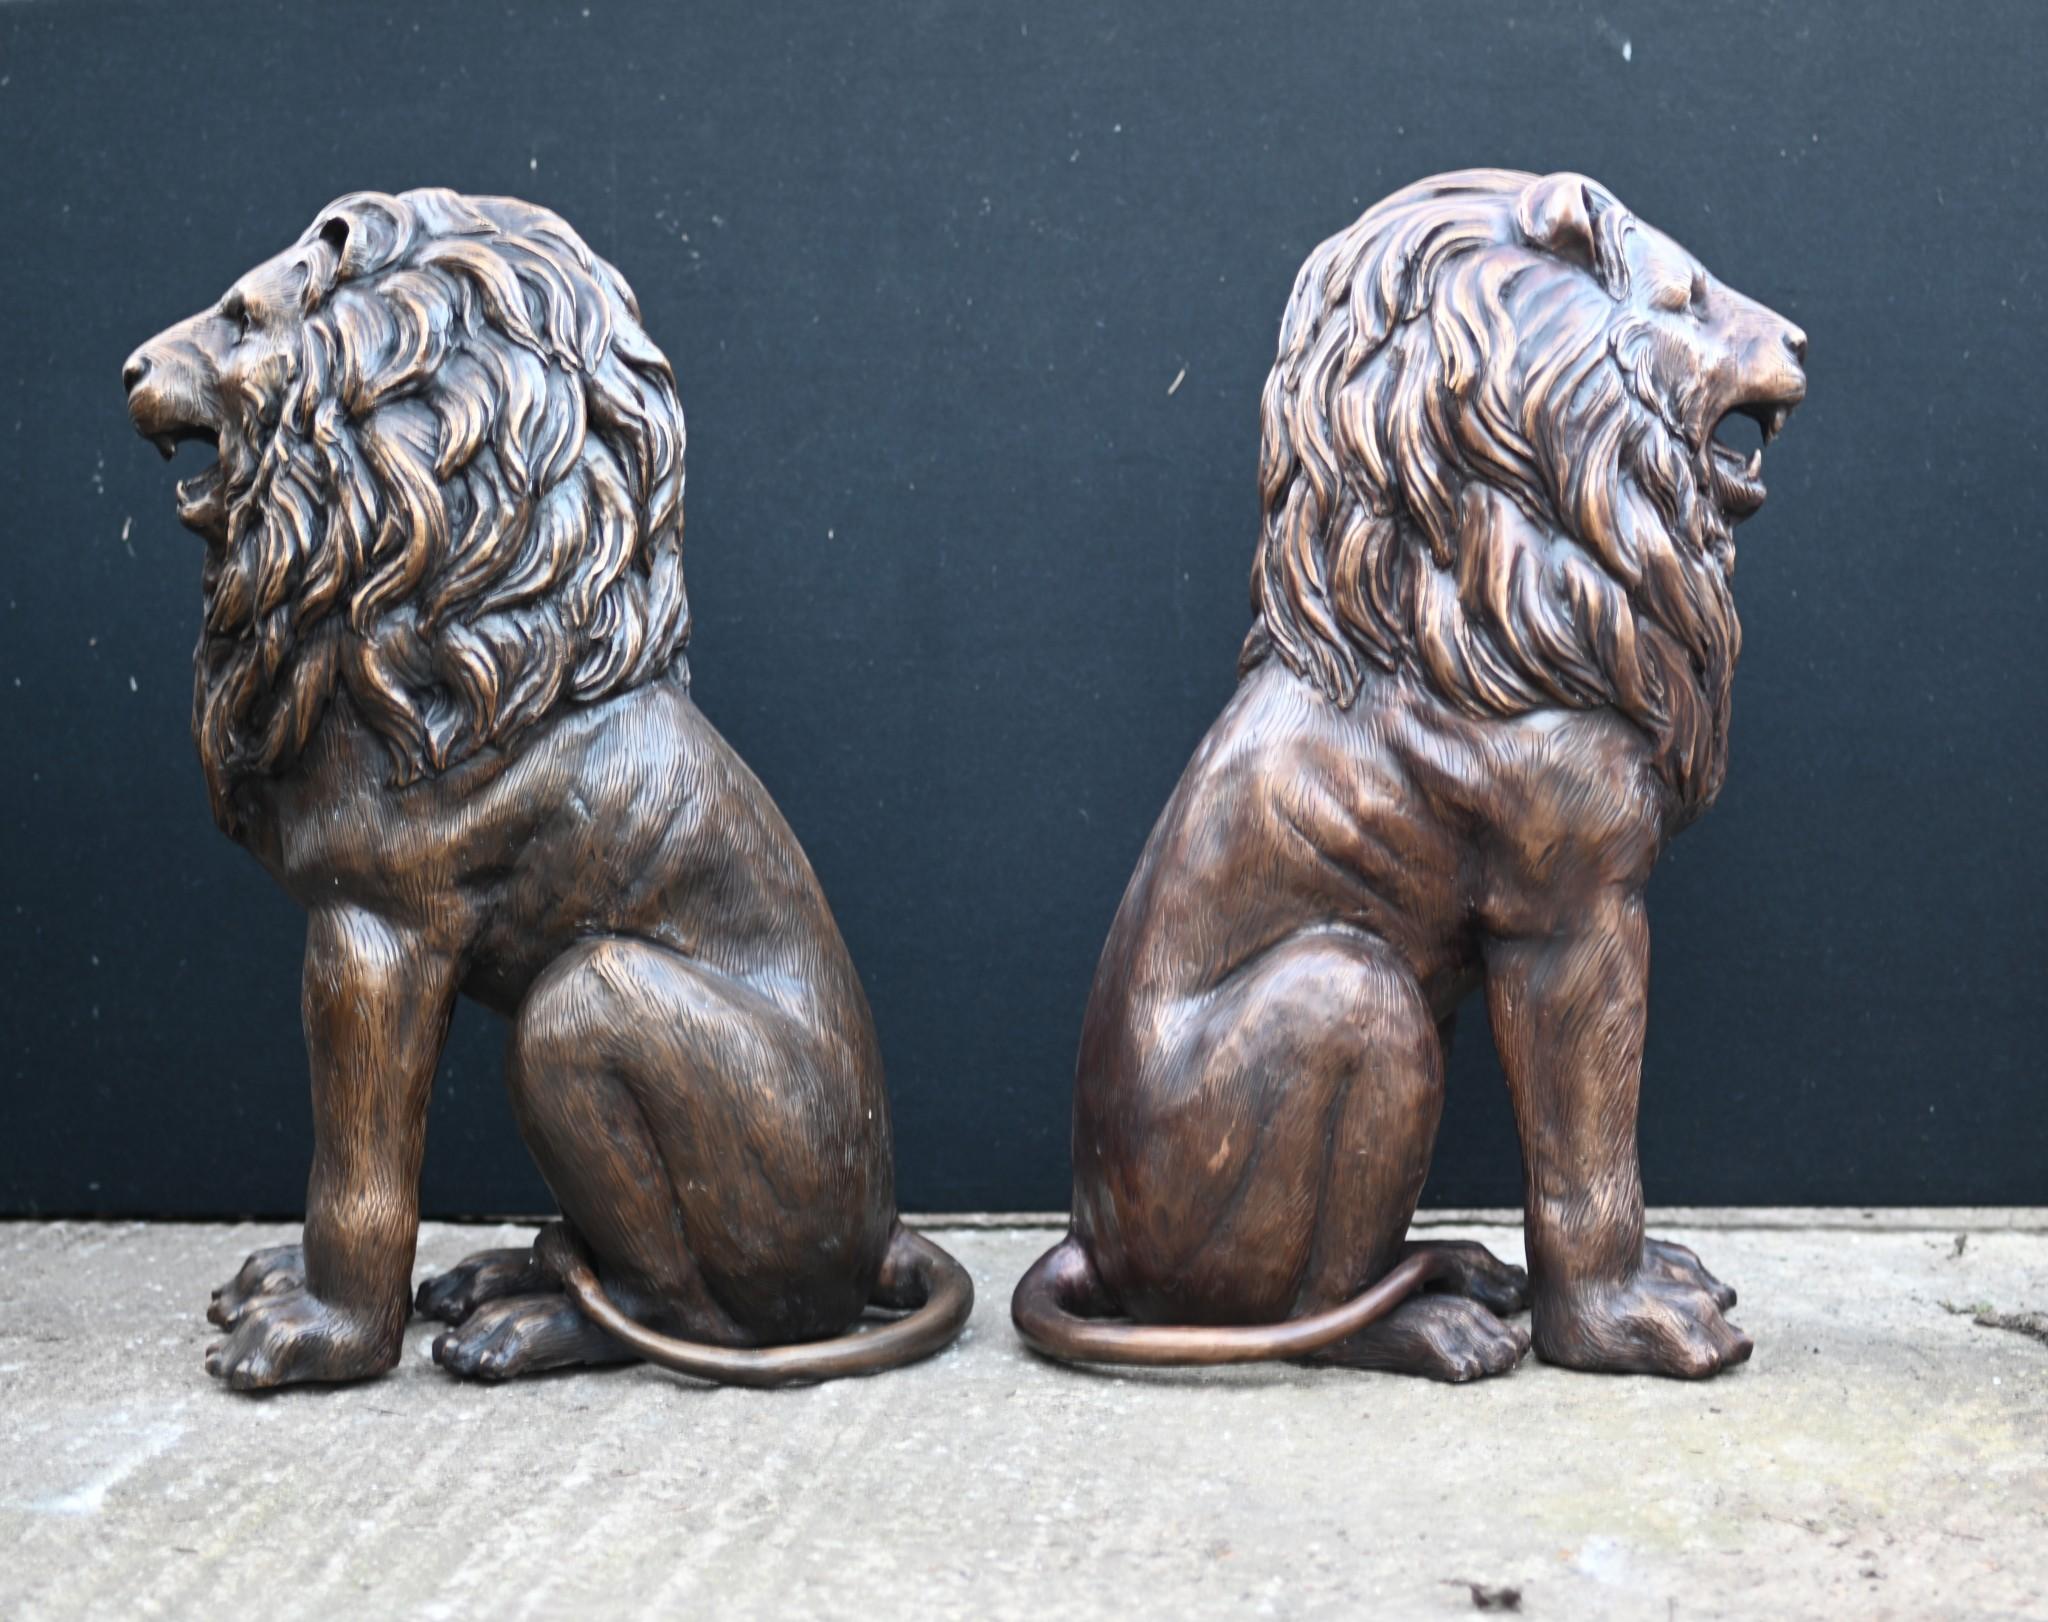 Classic pair of bronze lion gatekeeper statues
Perfect left and right, would look great either side of a door or entry way guarding the manor
Classic pair of lions in the manner of Canova
Great work a classic piece of art perfect for the